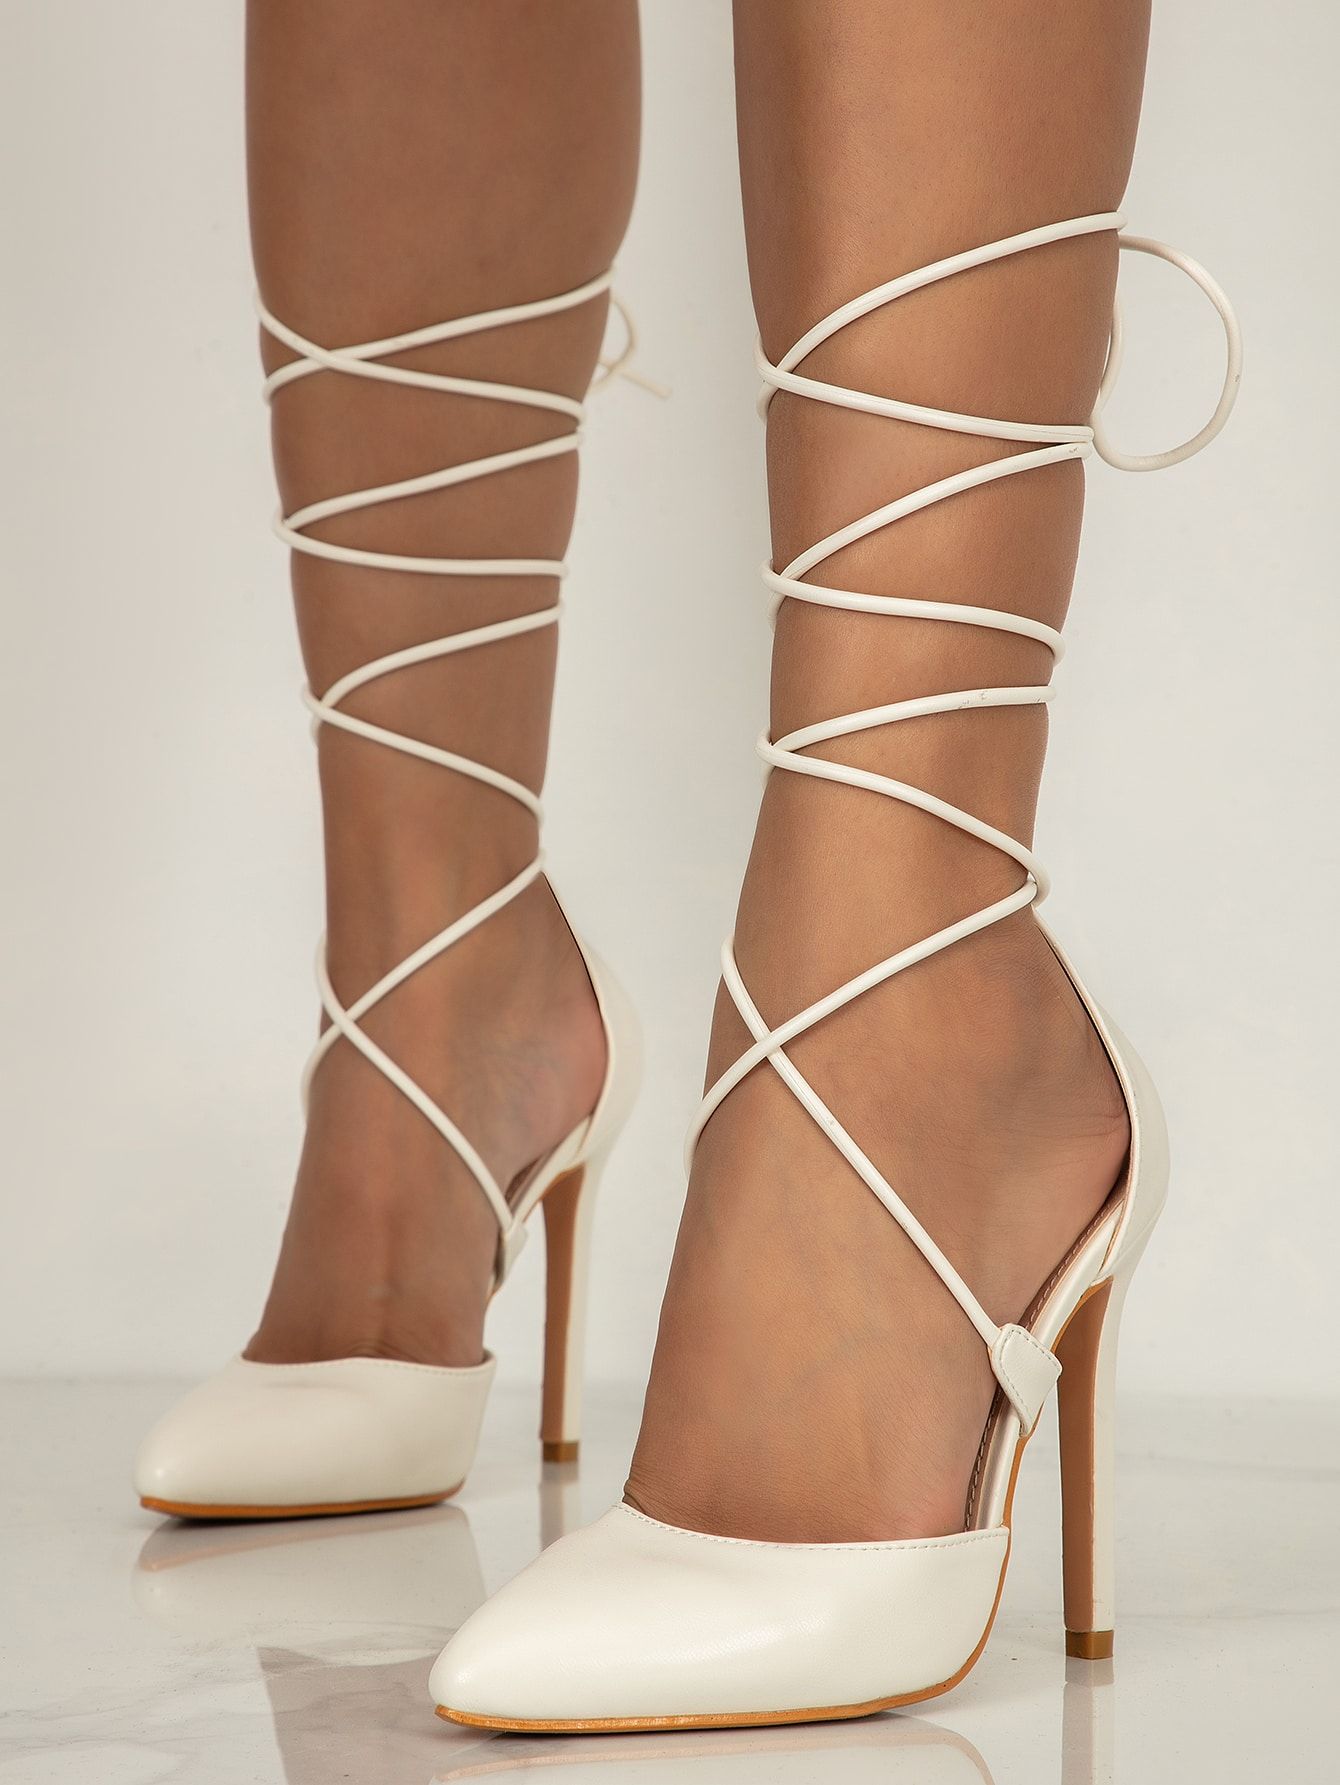 How to Wear Strappy Lace Up Heels: Best 13 Chic Outfit Ideas for Ladies